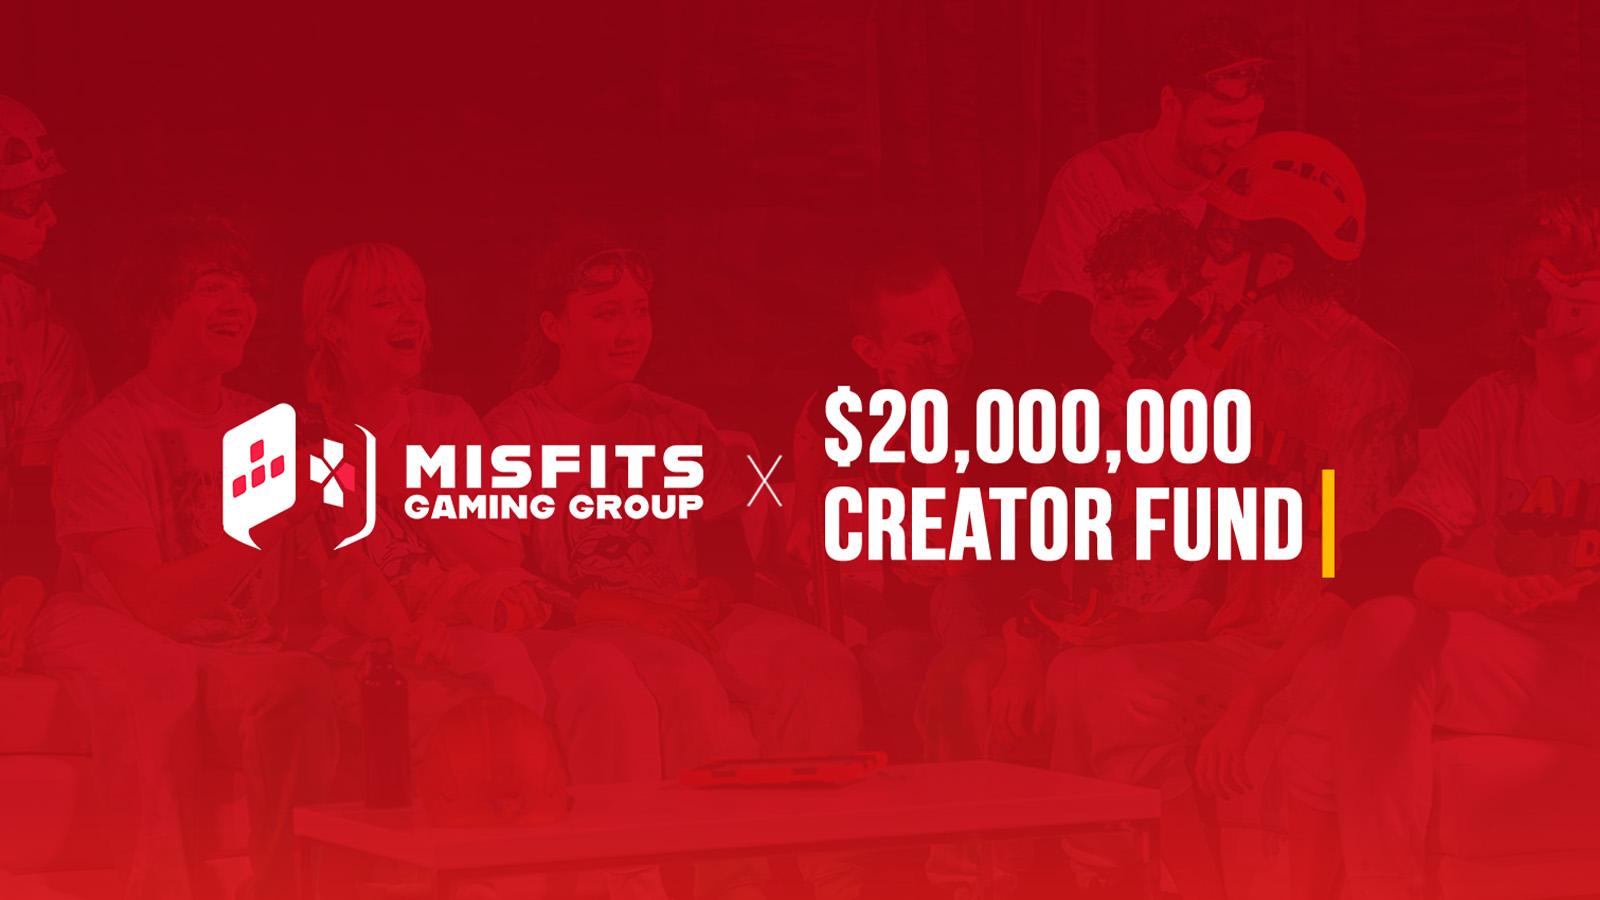 Misfits Gaming Group Signs 'Minecraft' Content Creators Ranboo